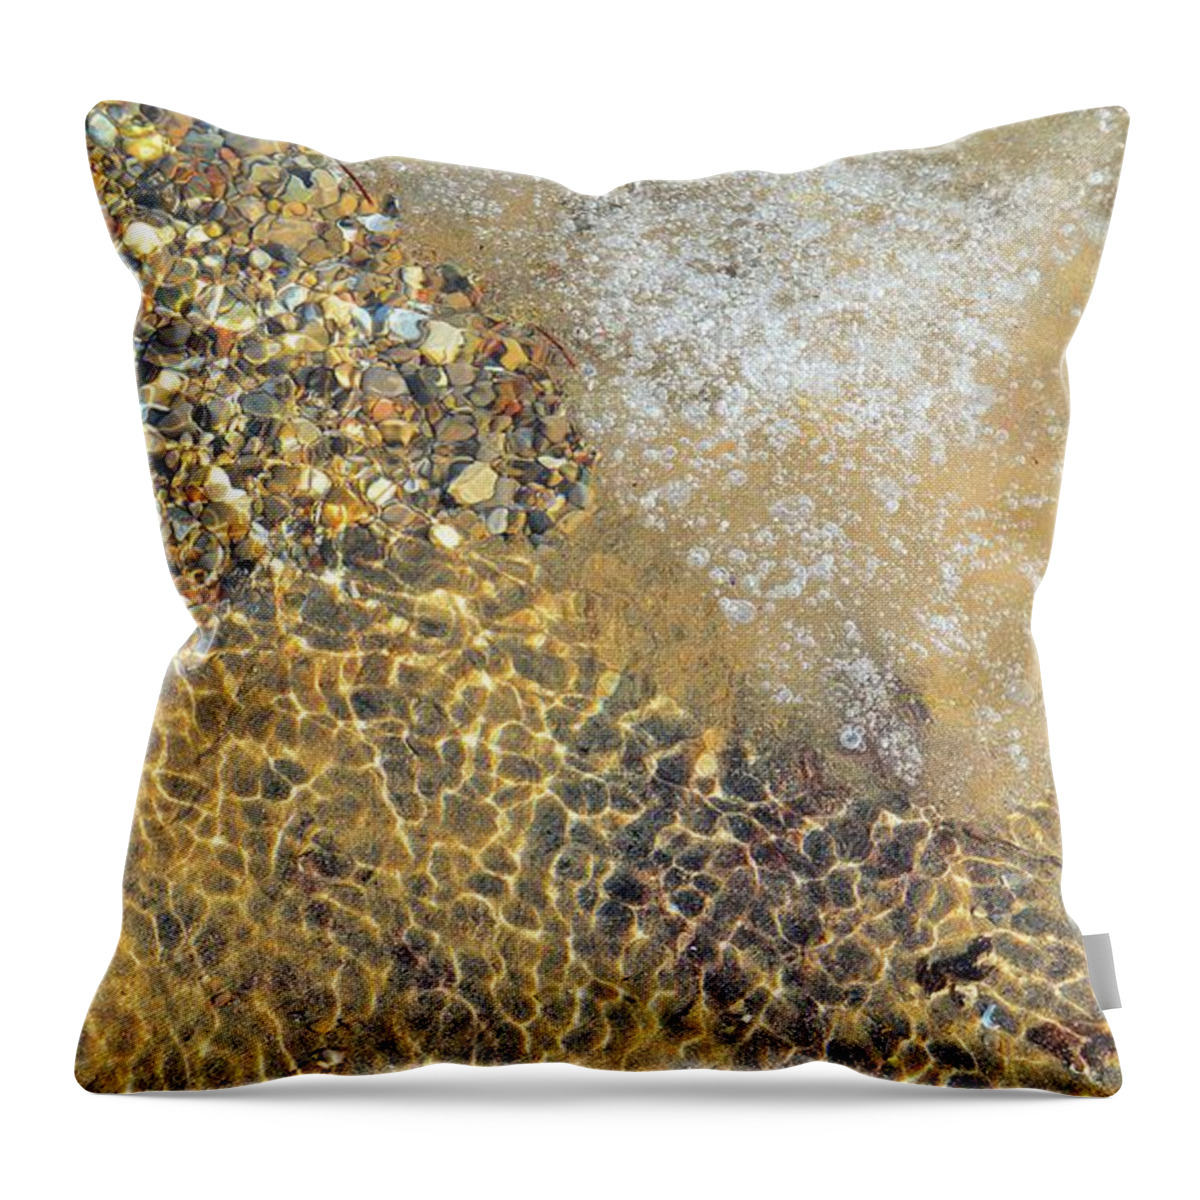 Abstract Throw Pillow featuring the digital art Under The Ice And Water Two by Lyle Crump